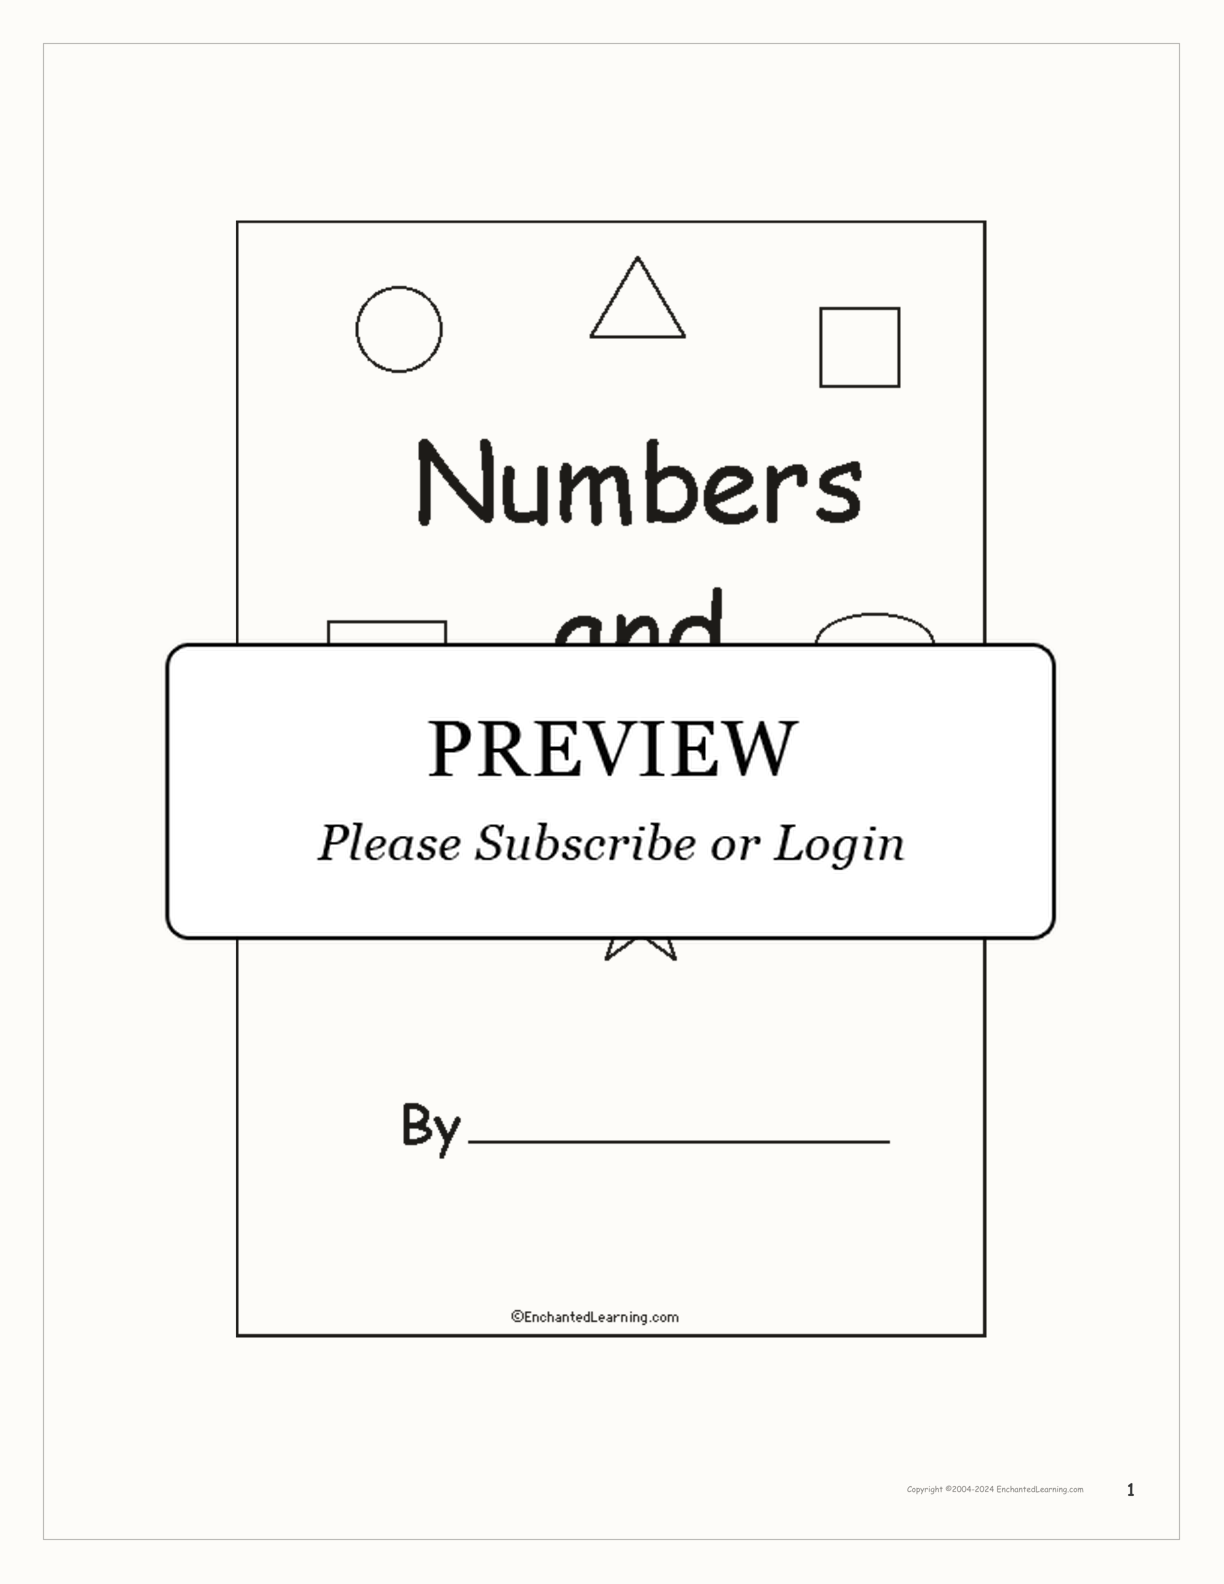 Numbers and Shapes Book interactive printout page 1